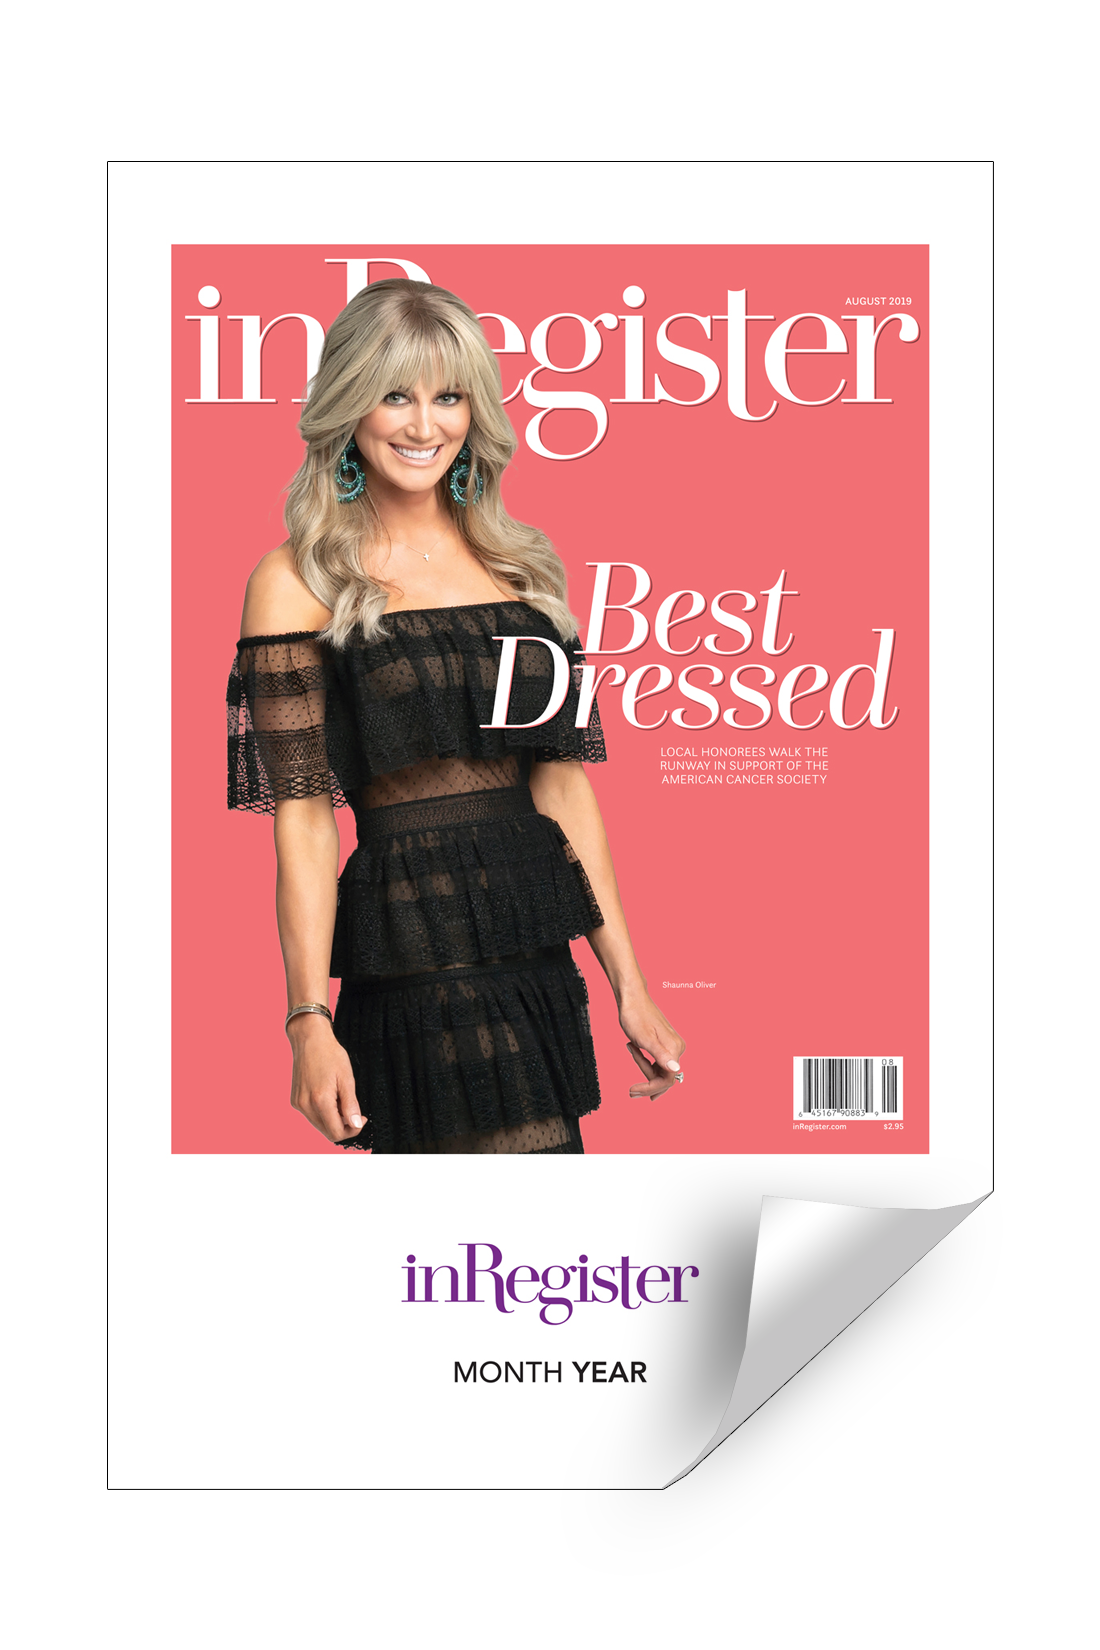 inRegister Magazine Cover / Article Reprints by NewsKeepsake